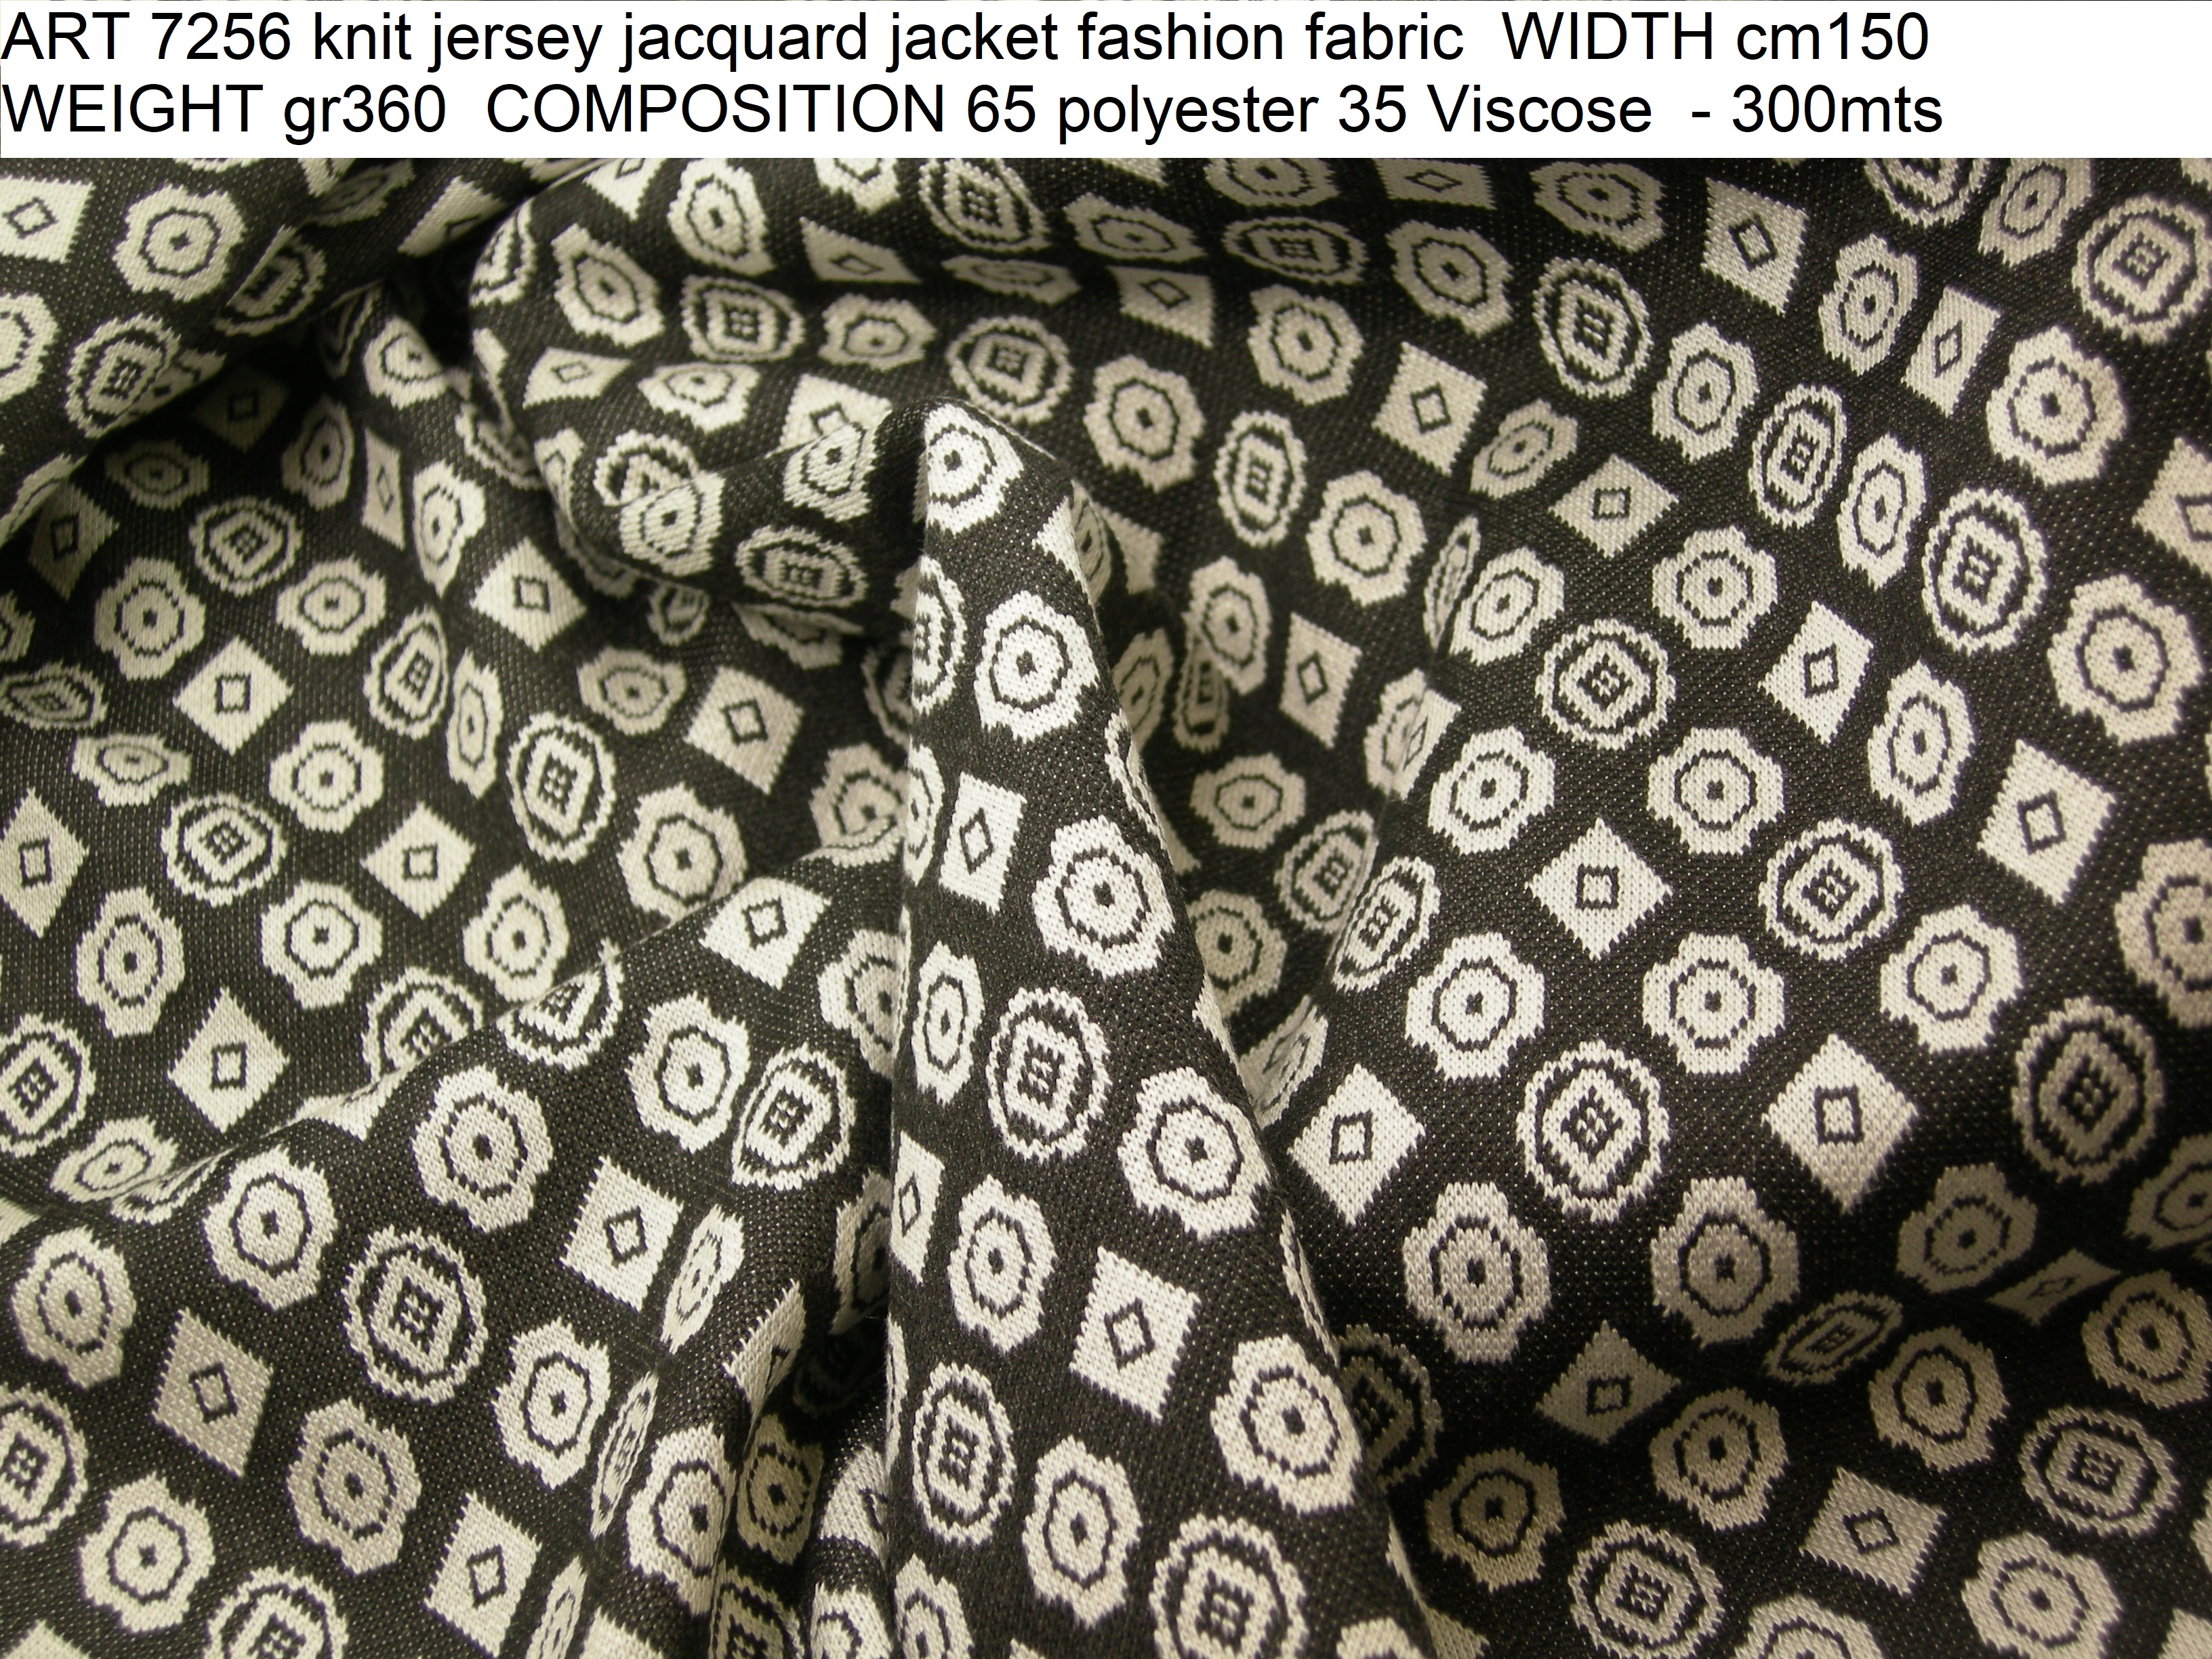 ART 7256 knit jersey jacquard jacket fashion fabric WIDTH cm150 WEIGHT gr360 COMPOSITION 65 polyester 35 Viscose - 300mts